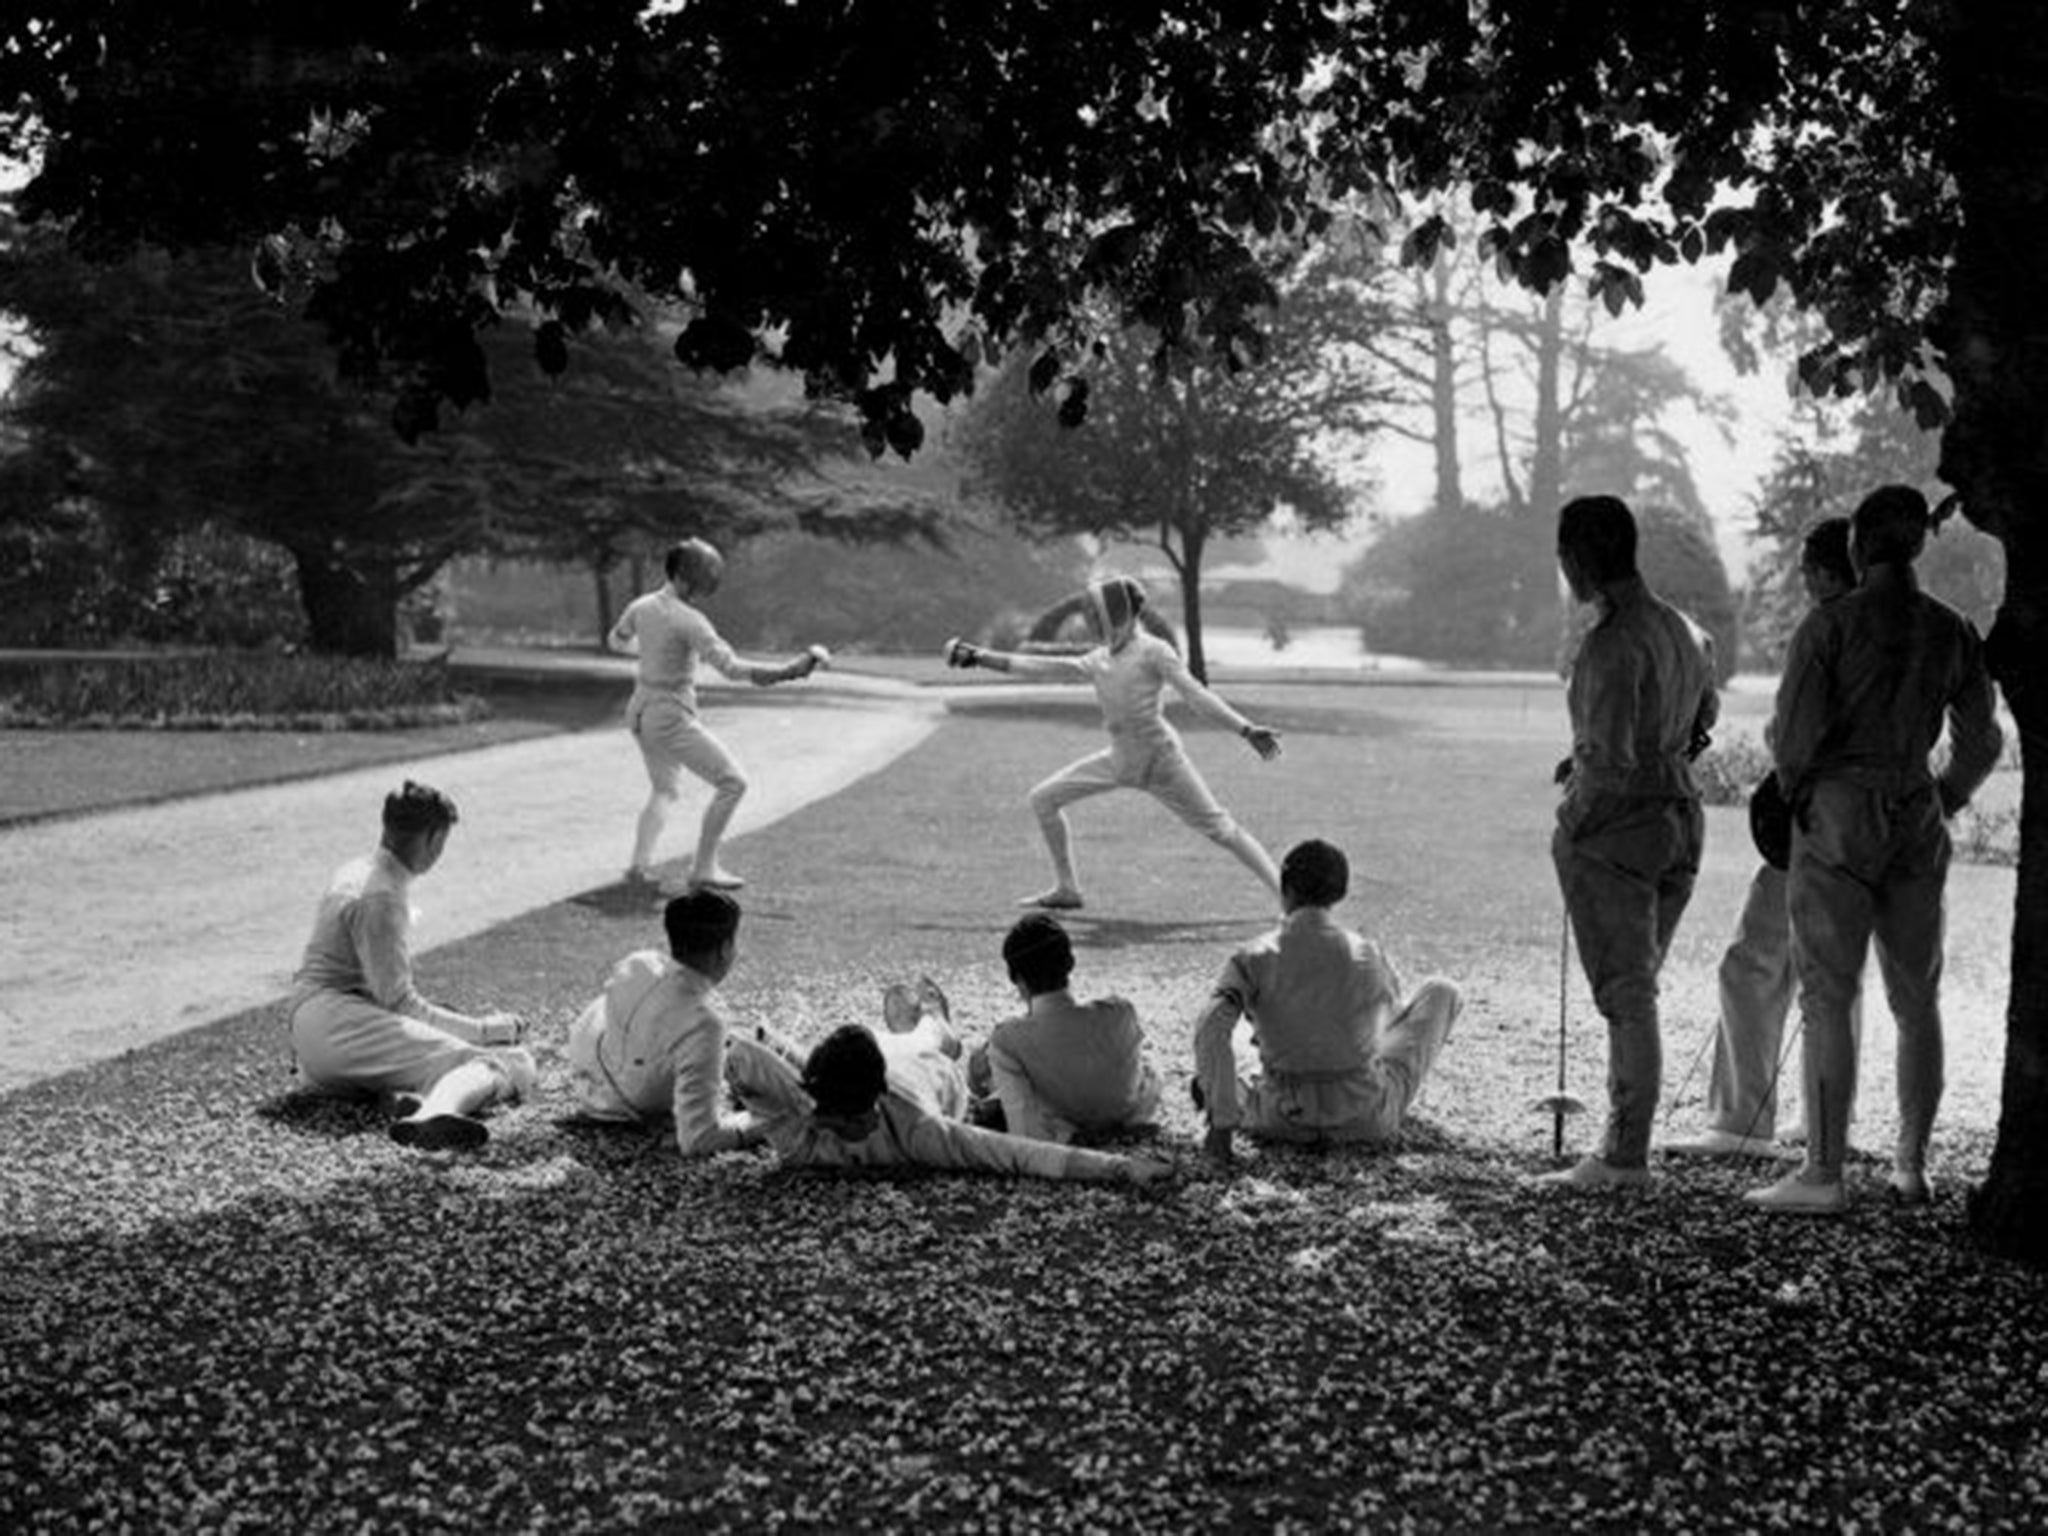 Cambridge and Oxford students hone their fencing skills back in 1936